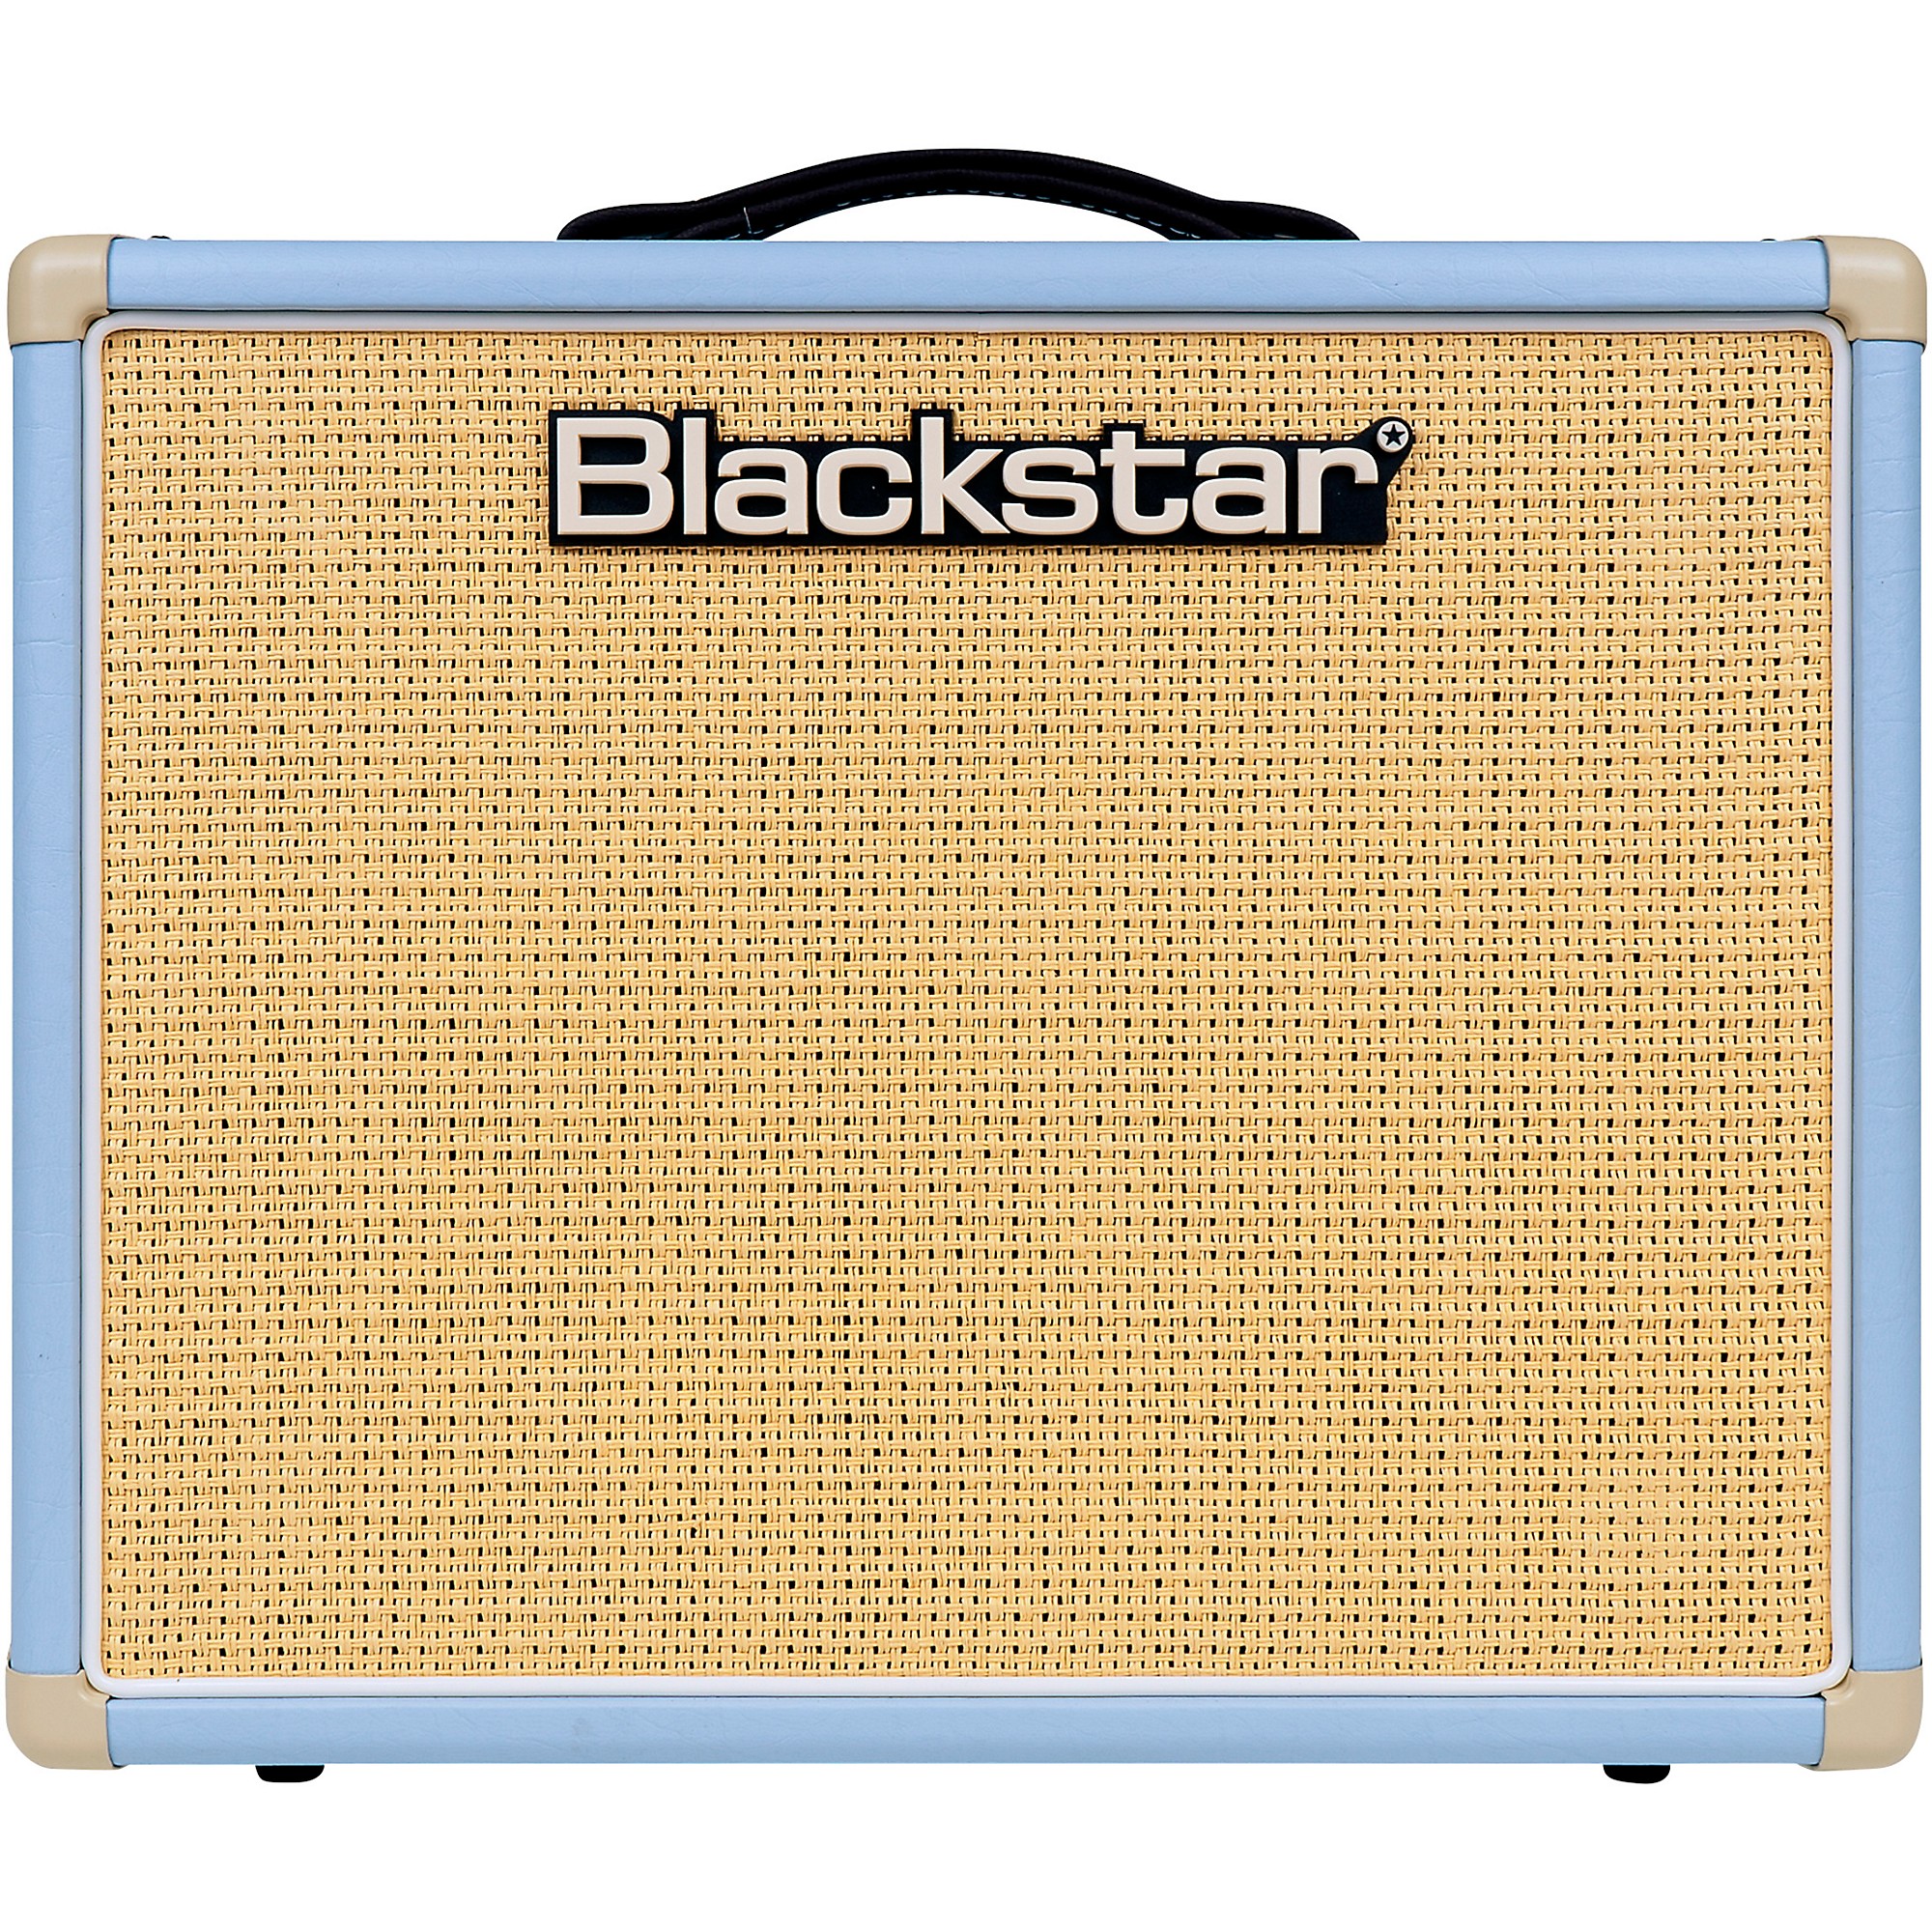 Blackstar HT-5R MkII 5W 1x12 Limited-Edition Tube Guitar Combo Amp Baby Blue